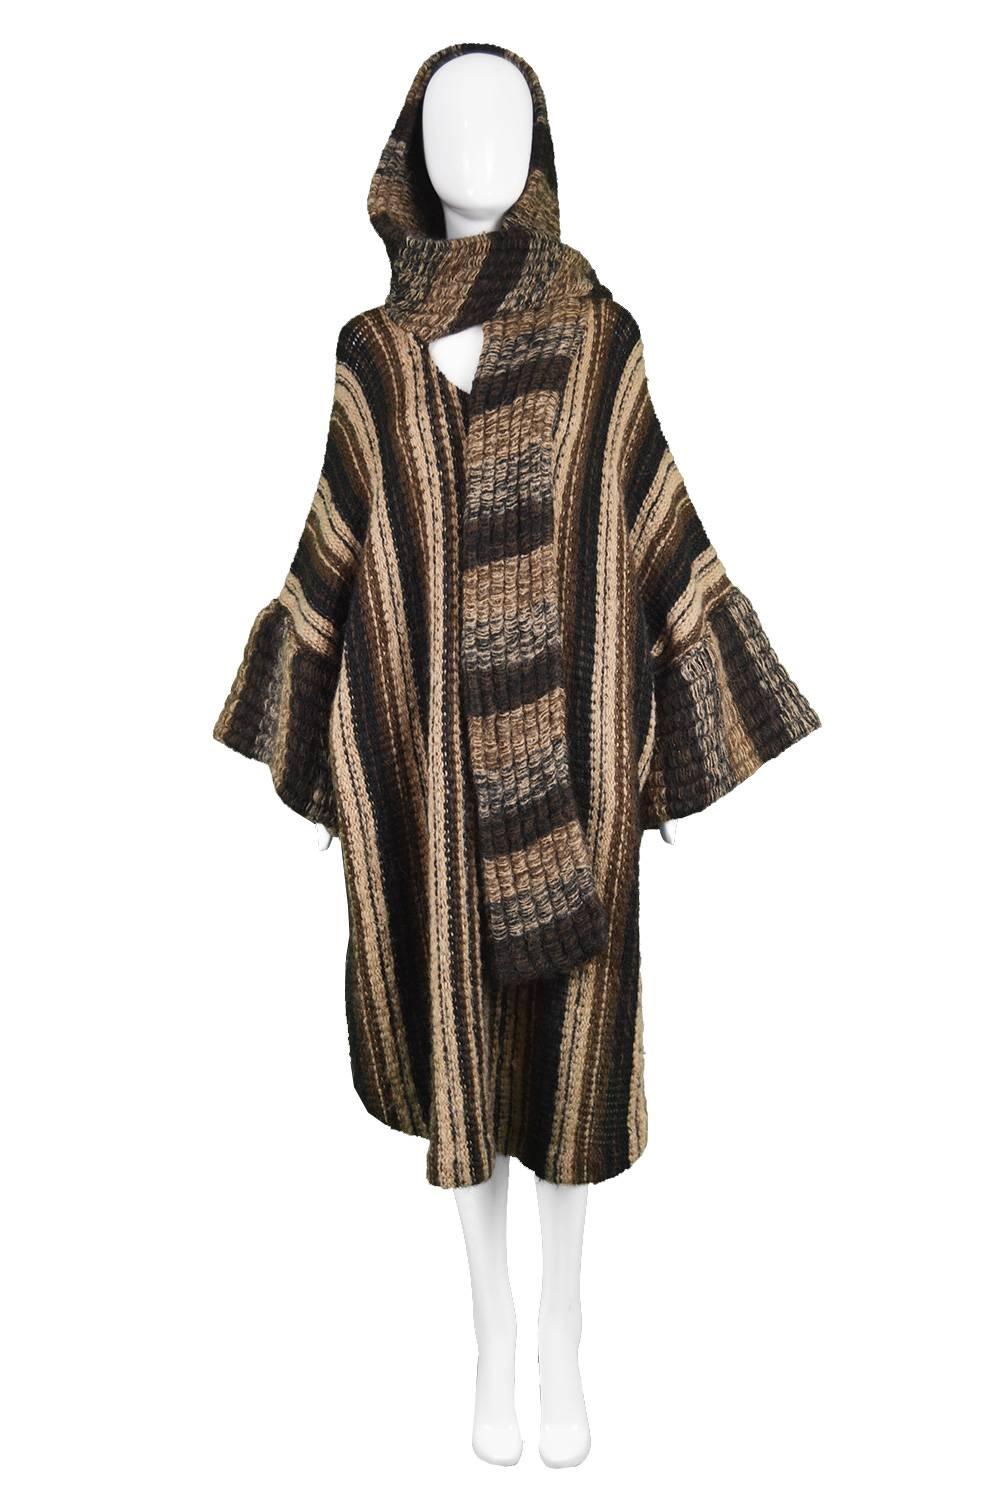 Mary Quant Vintage 1970s Brown Avant Garde Knit Hood Dress with Scarf Detail

Size: Marked L but will fit most due to loose, oversized fit.
Bust - Free
Waist - Free
Hips - Free
Length (Shoulder to Hem) - 38” / 96cm
Shoulder to Shoulder - 25” /